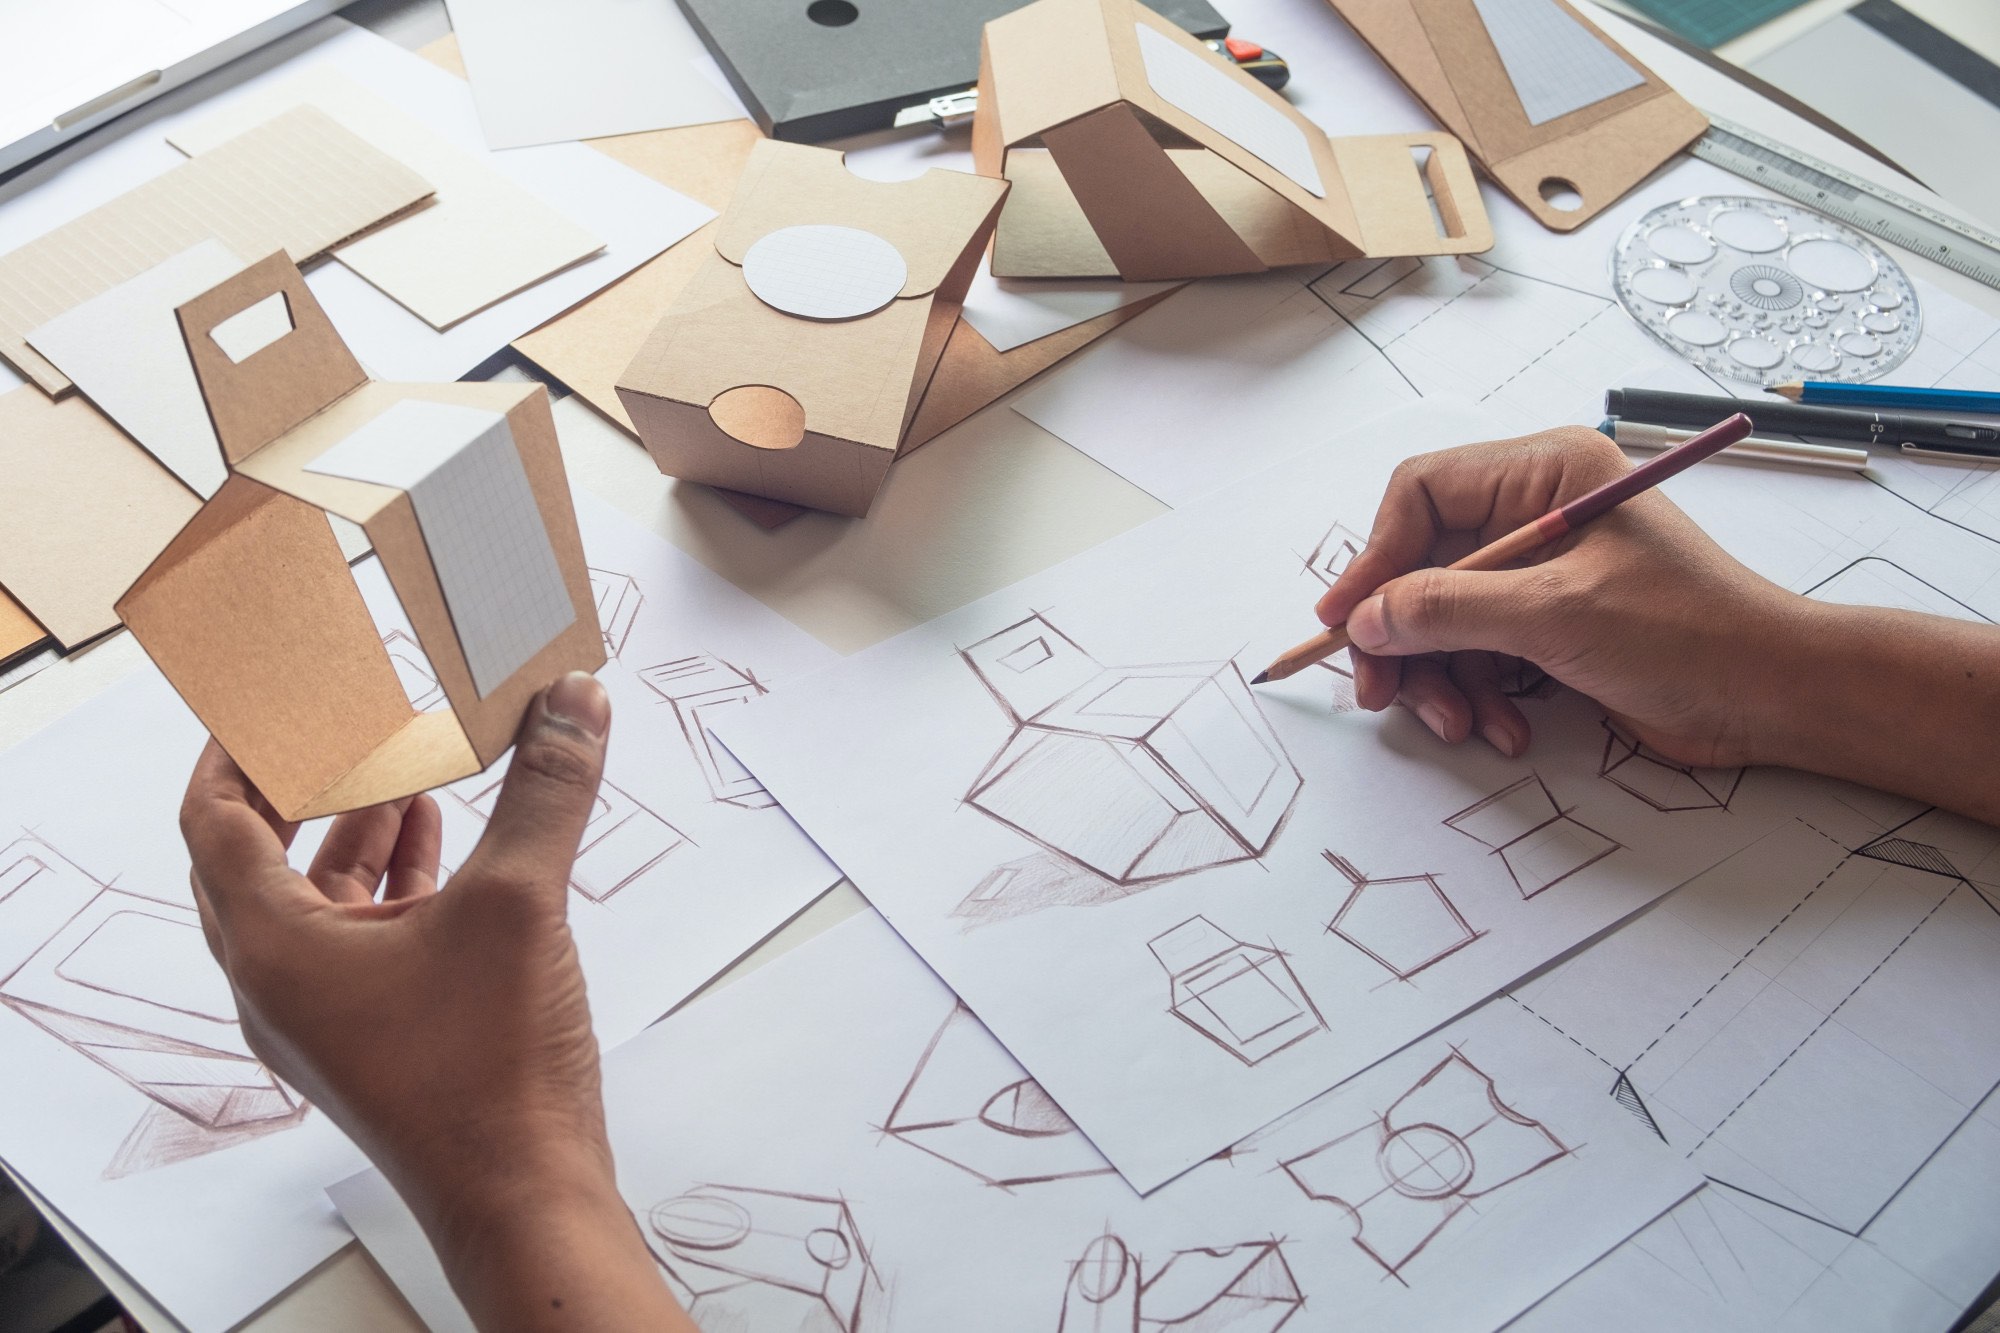 How to Package Your Products: The Complete Business Packaging Guide